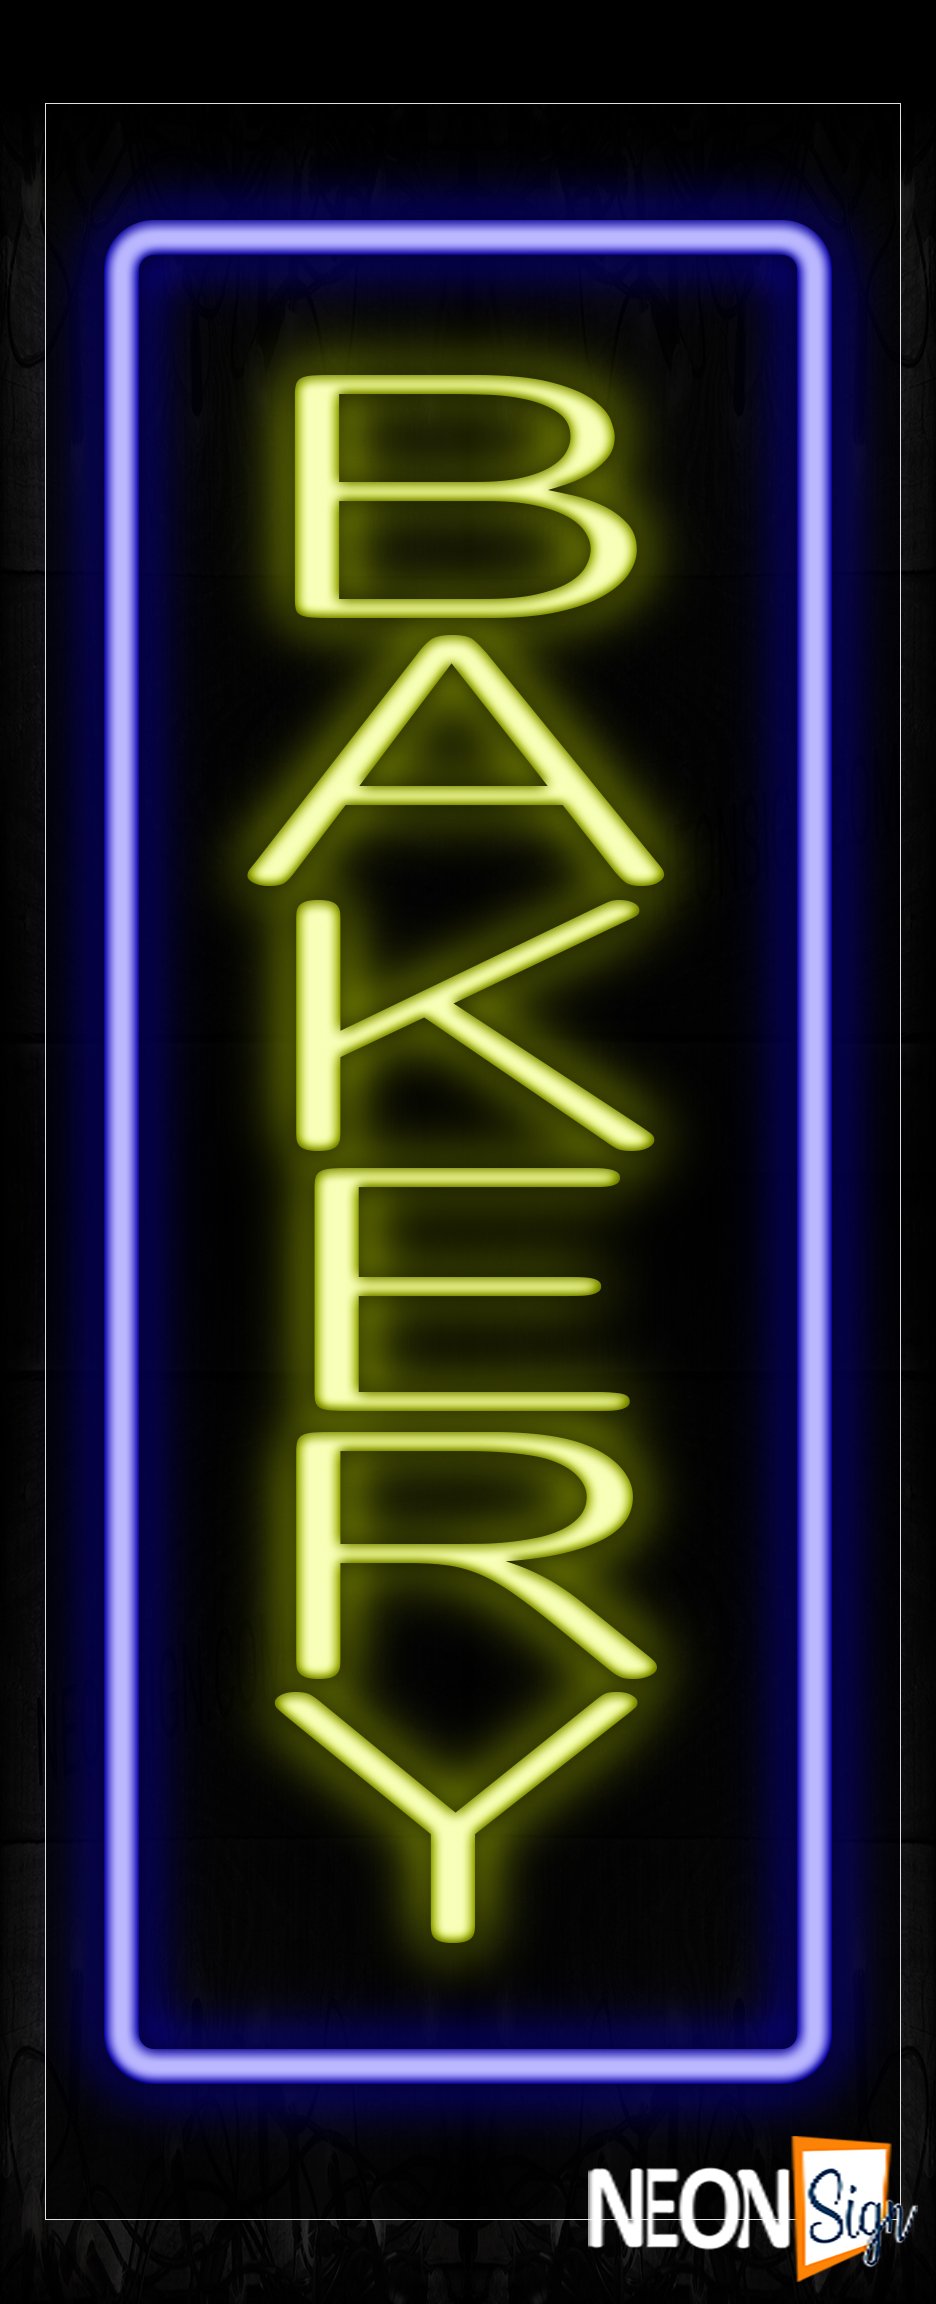 Image of 10964 Bakery In Yellow With Blue Border Neon Signs - Vertical_13x32 Black Backing